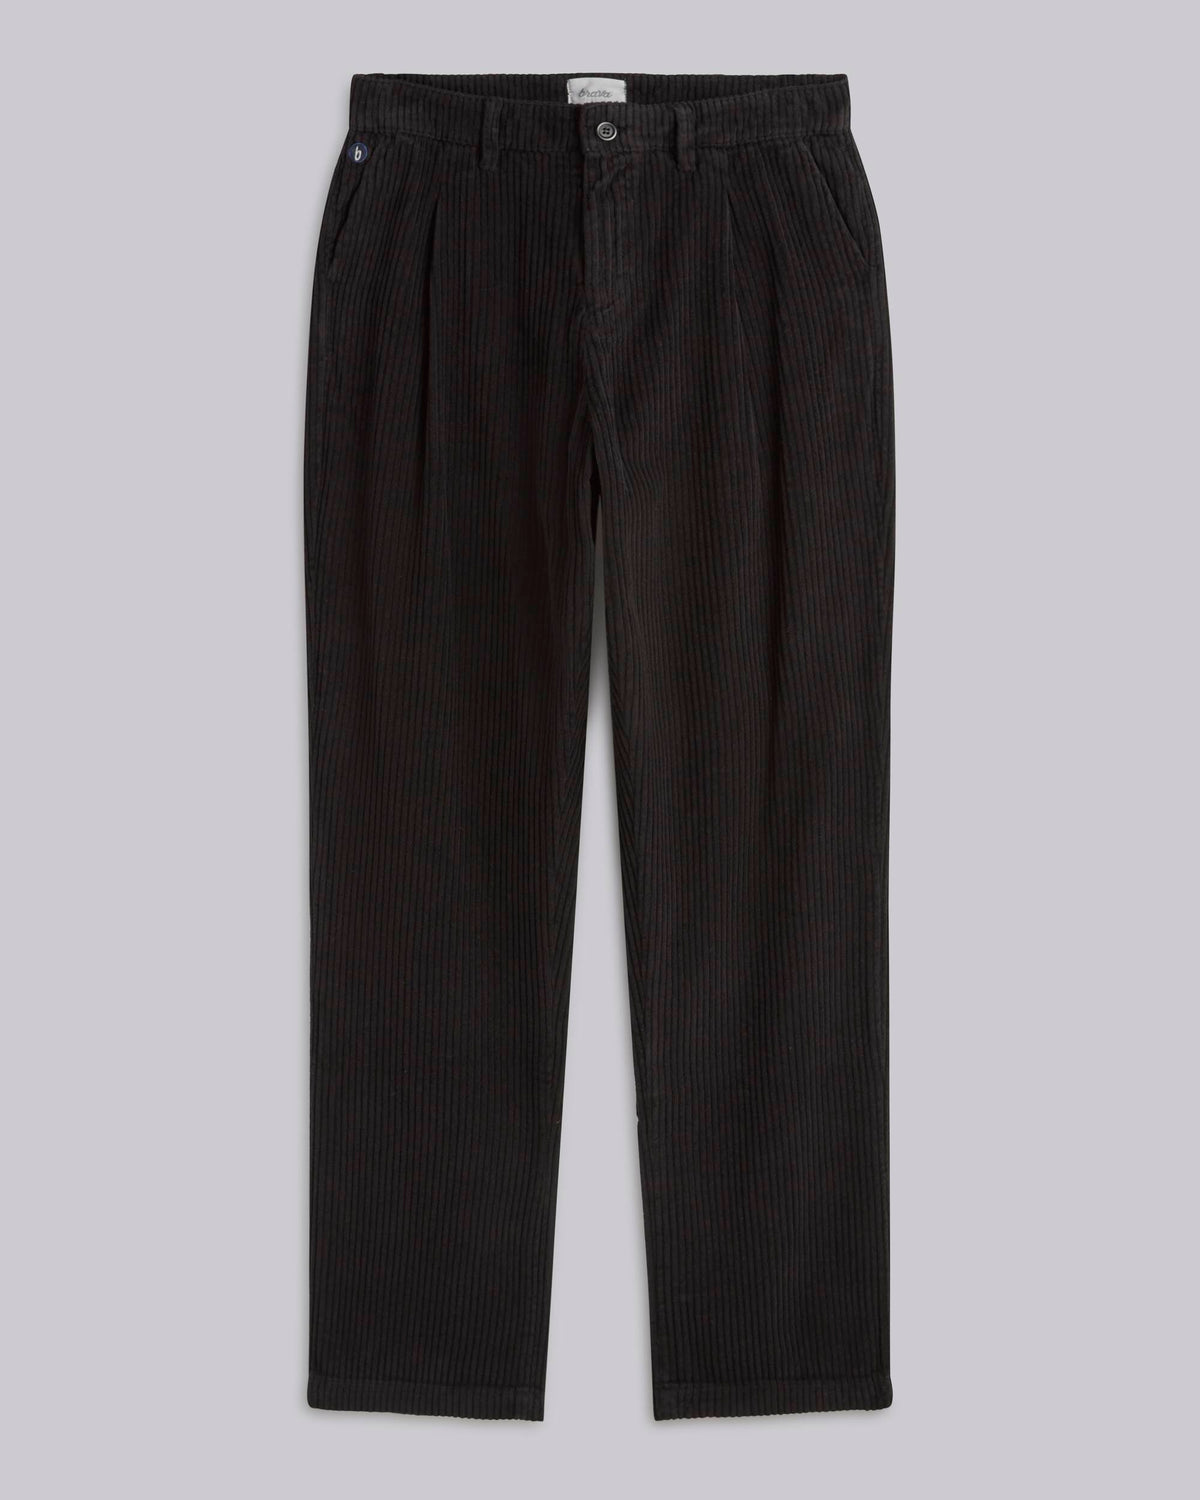 Pleated corduroy pants - Women's Clothing Online Made in Italy